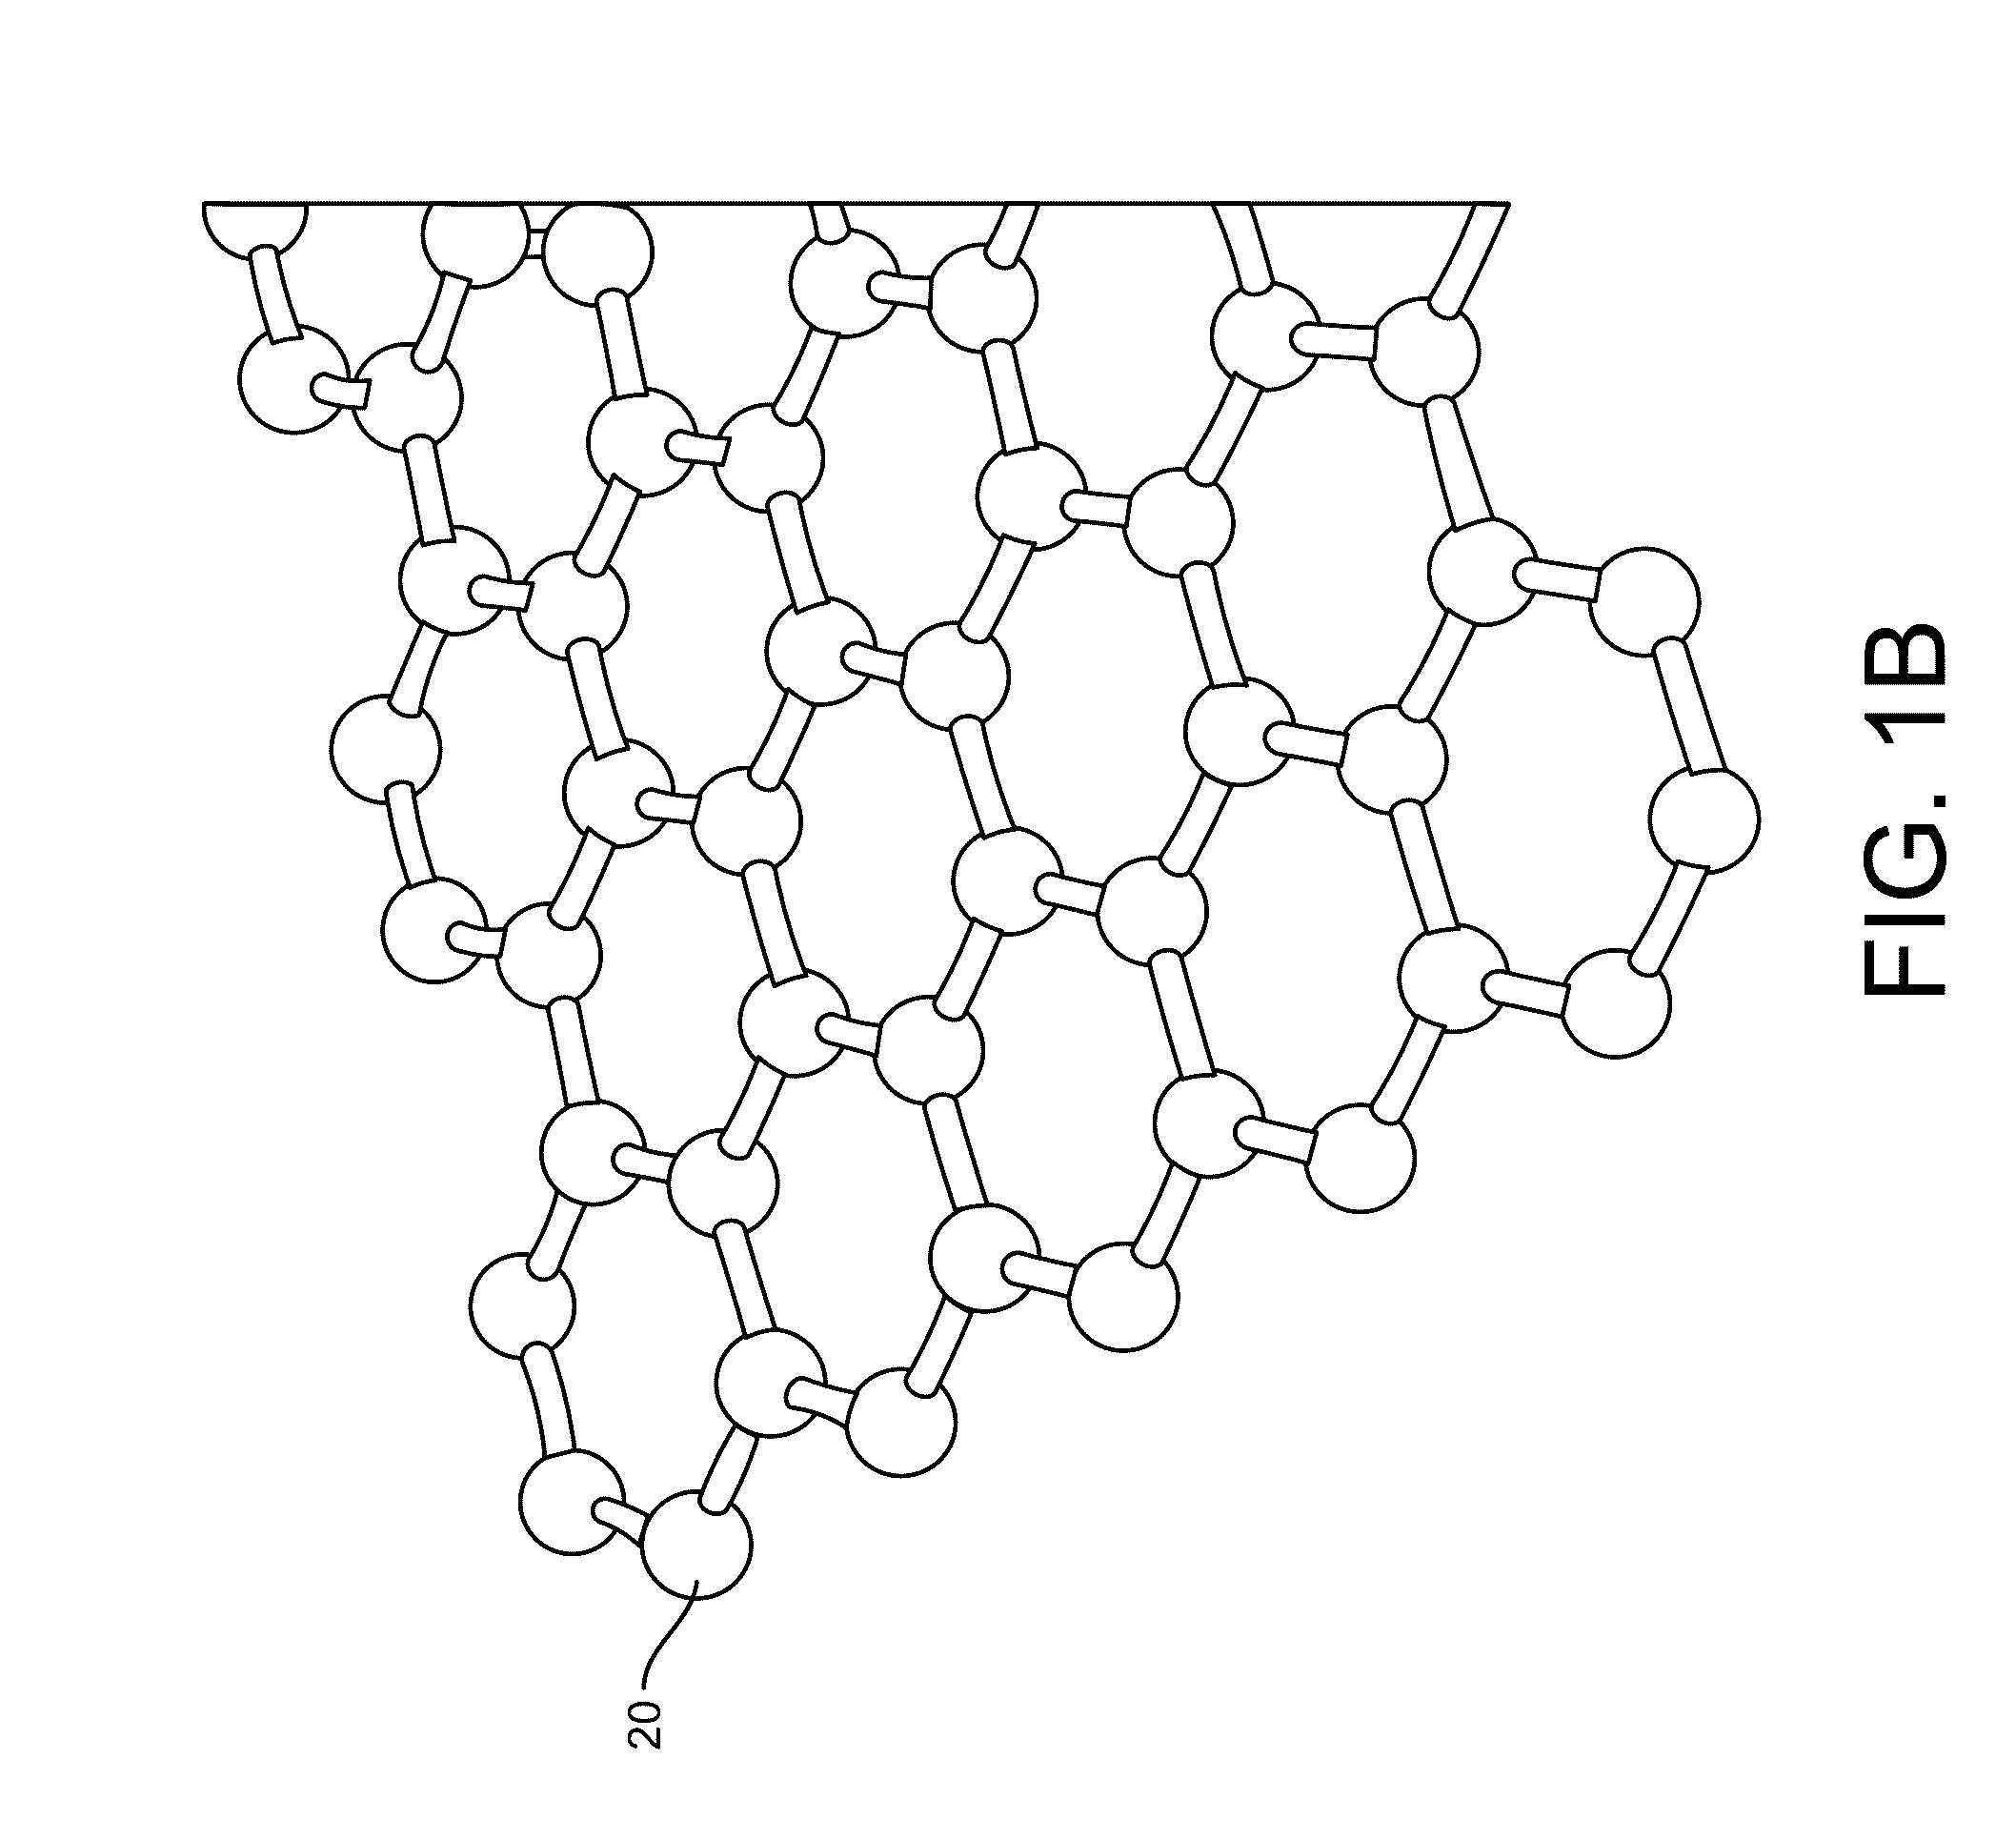 Graphene fet devices, systems, and methods of using the same for sequencing nucleic acids